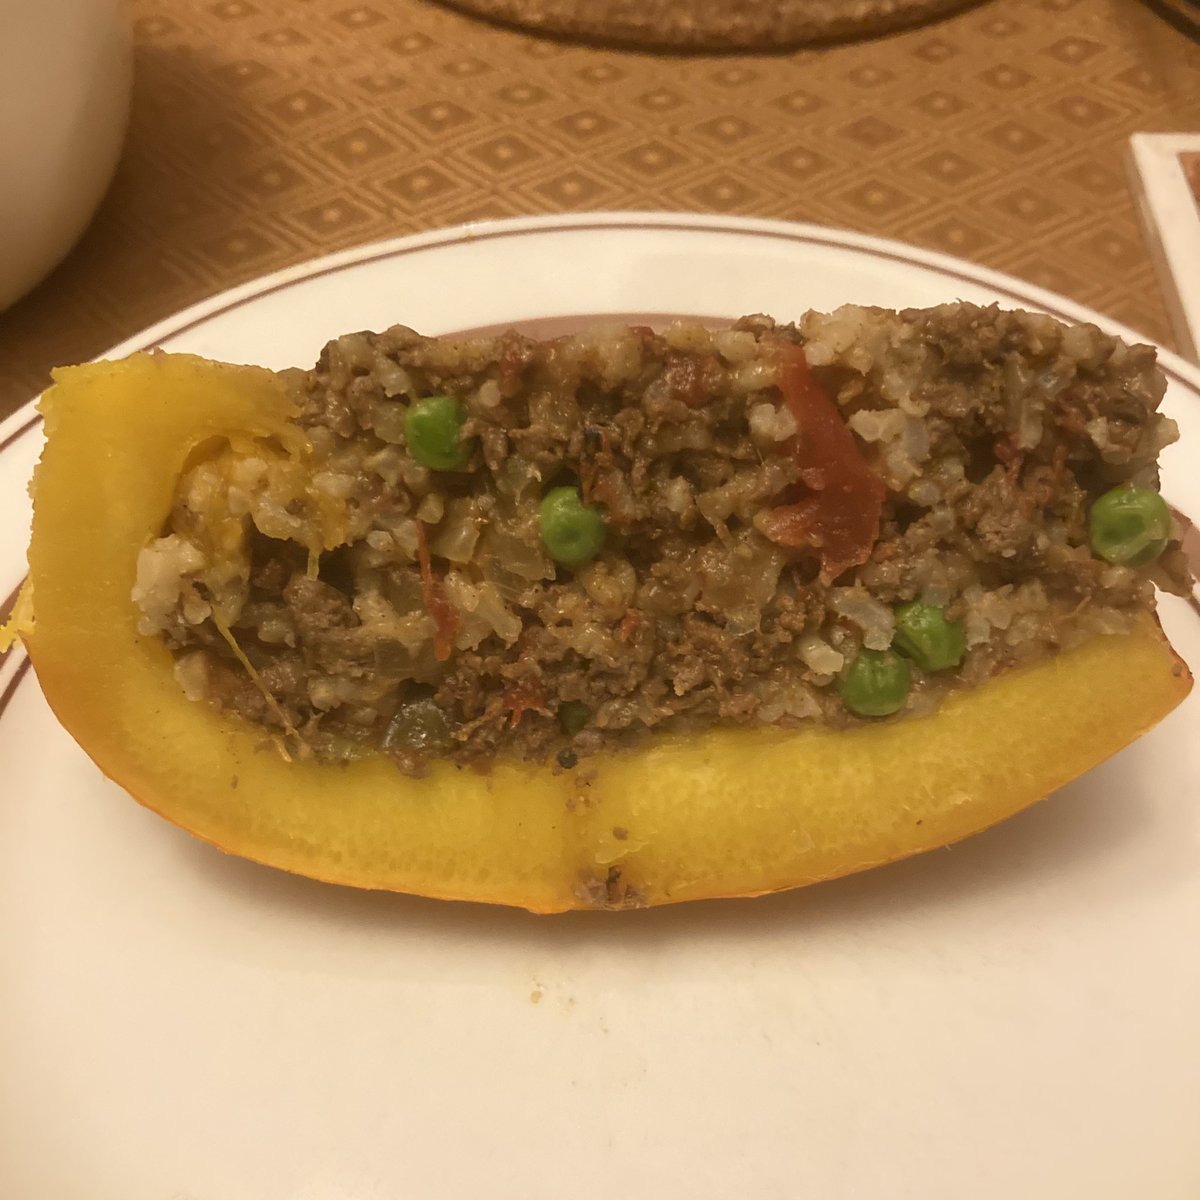 Combining two of my culinary passions, I present... a pumpkin forced with curried beef and rice!
#CookingIsMyTherapy #HistoricFoodways